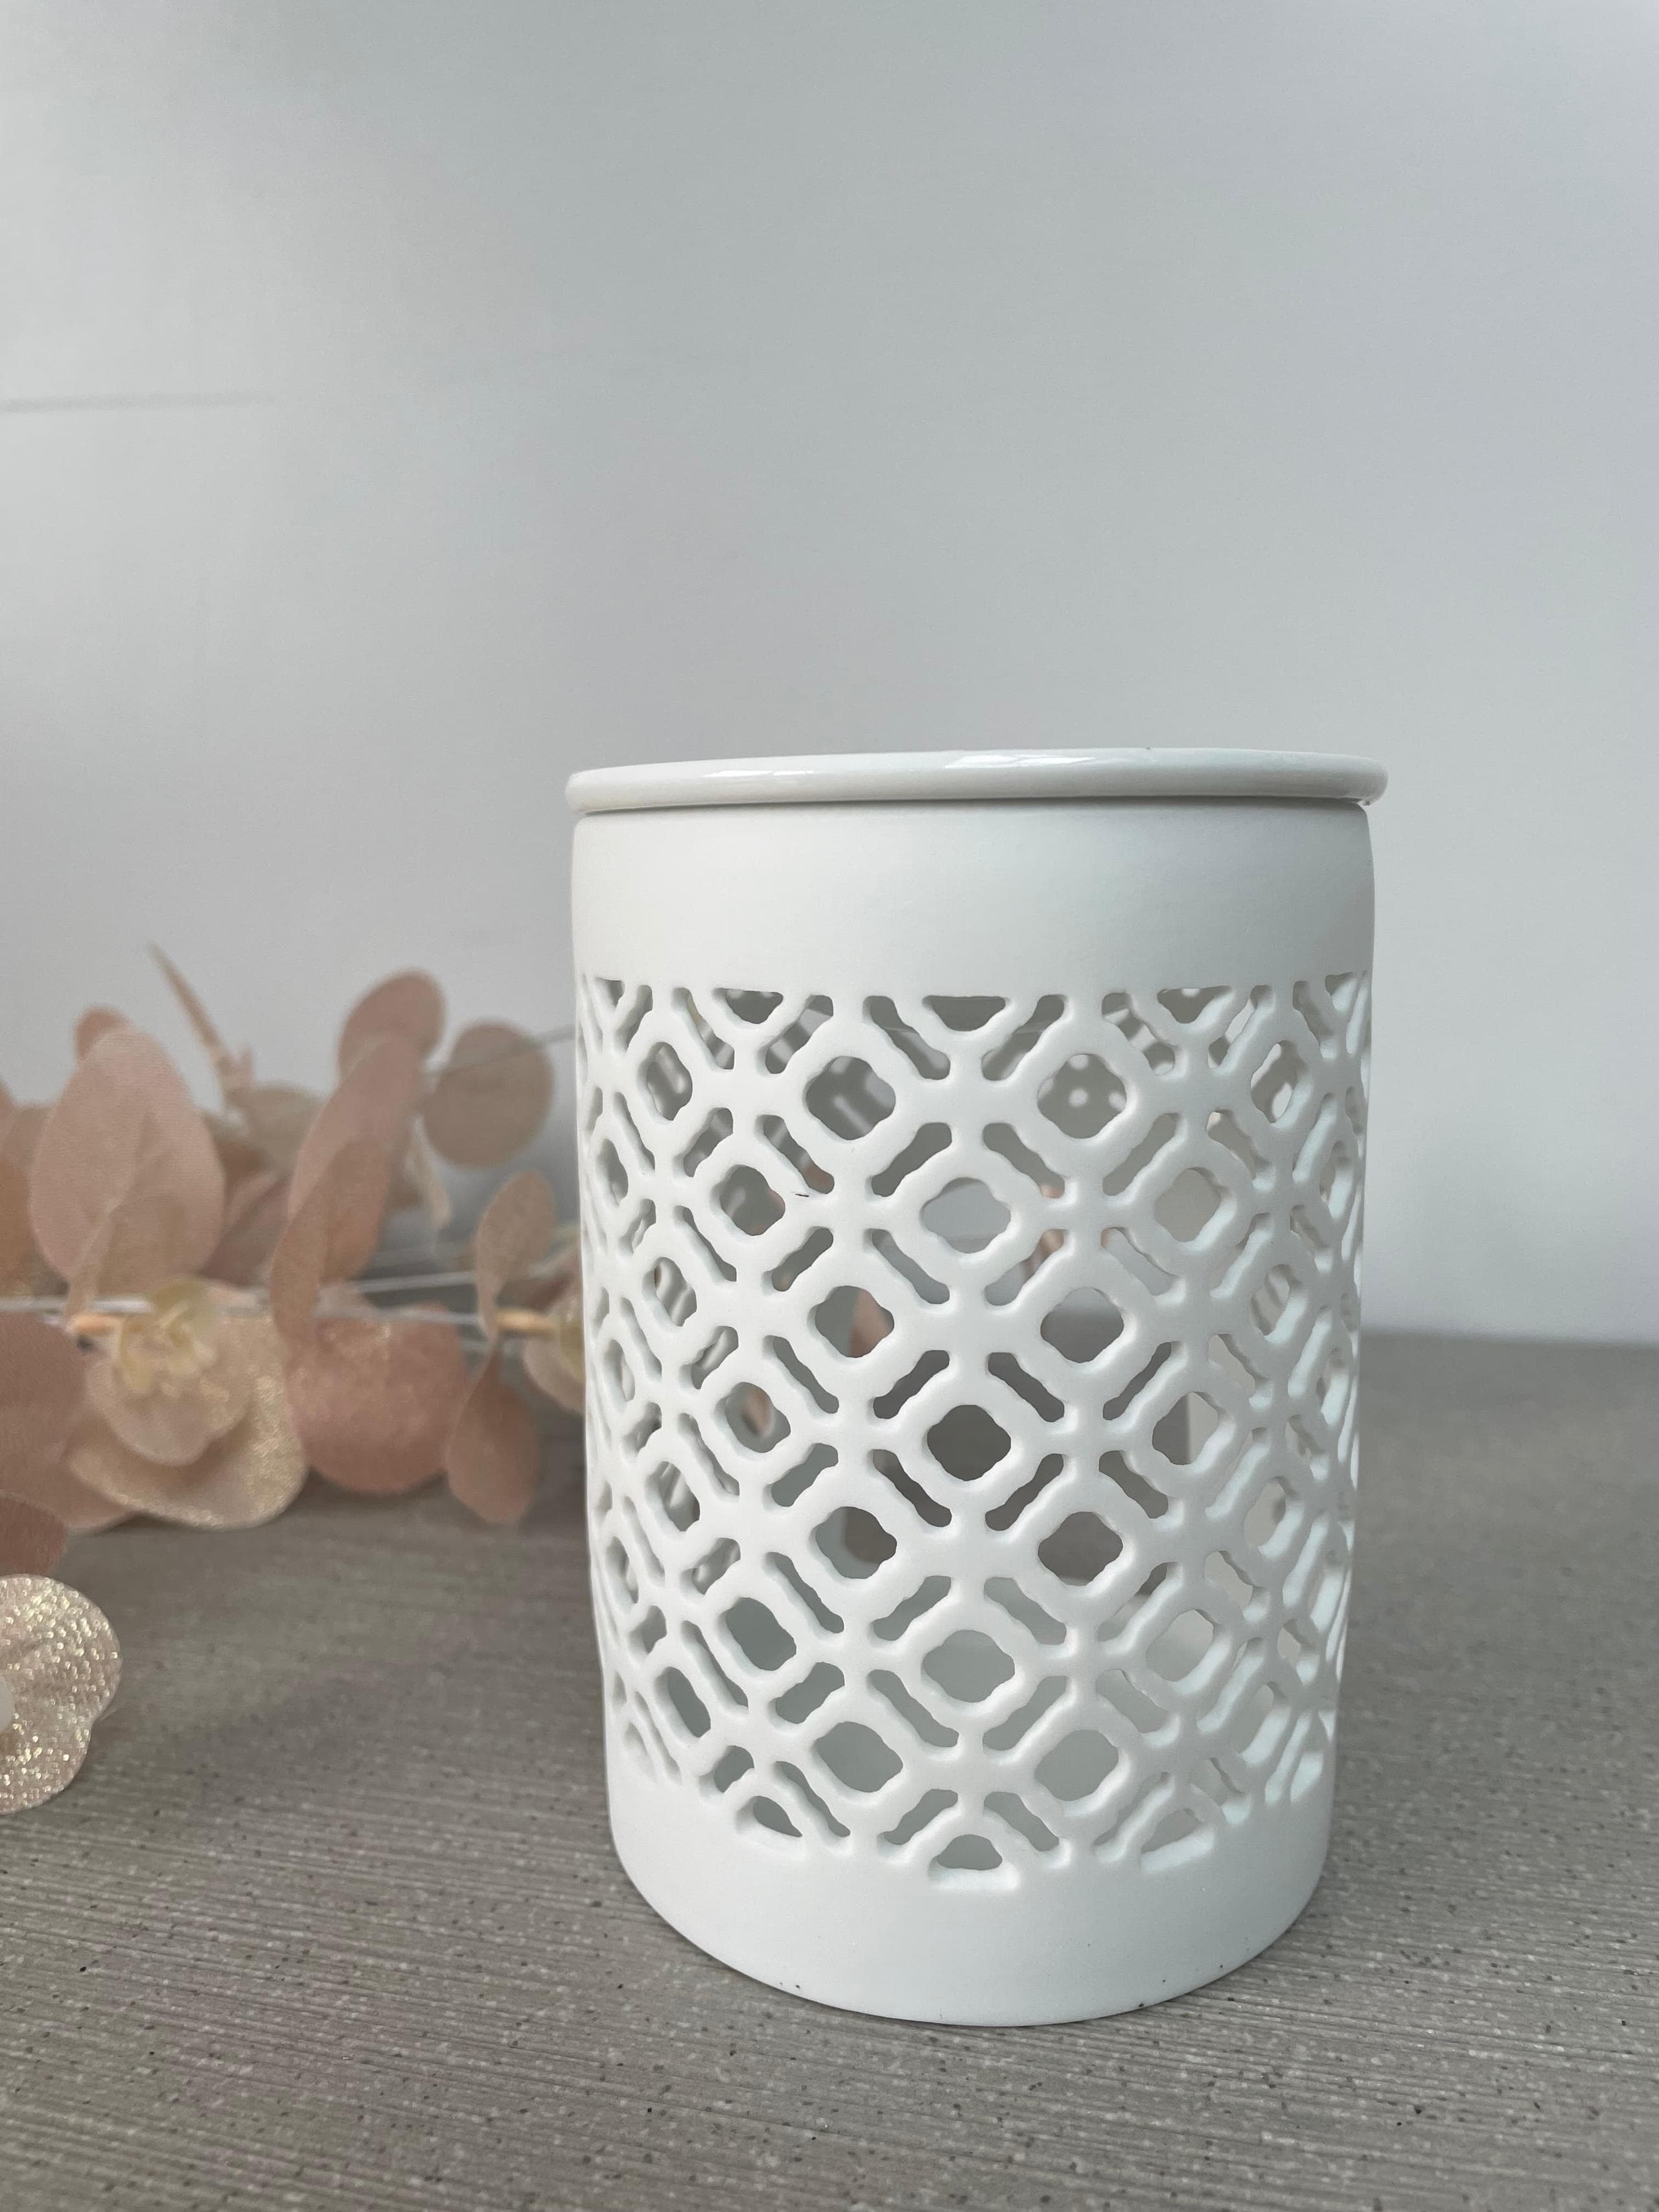 Lattice Design Tealight burner in matte white finish, a lovely addition to your home or a brilliant idea for a gift!